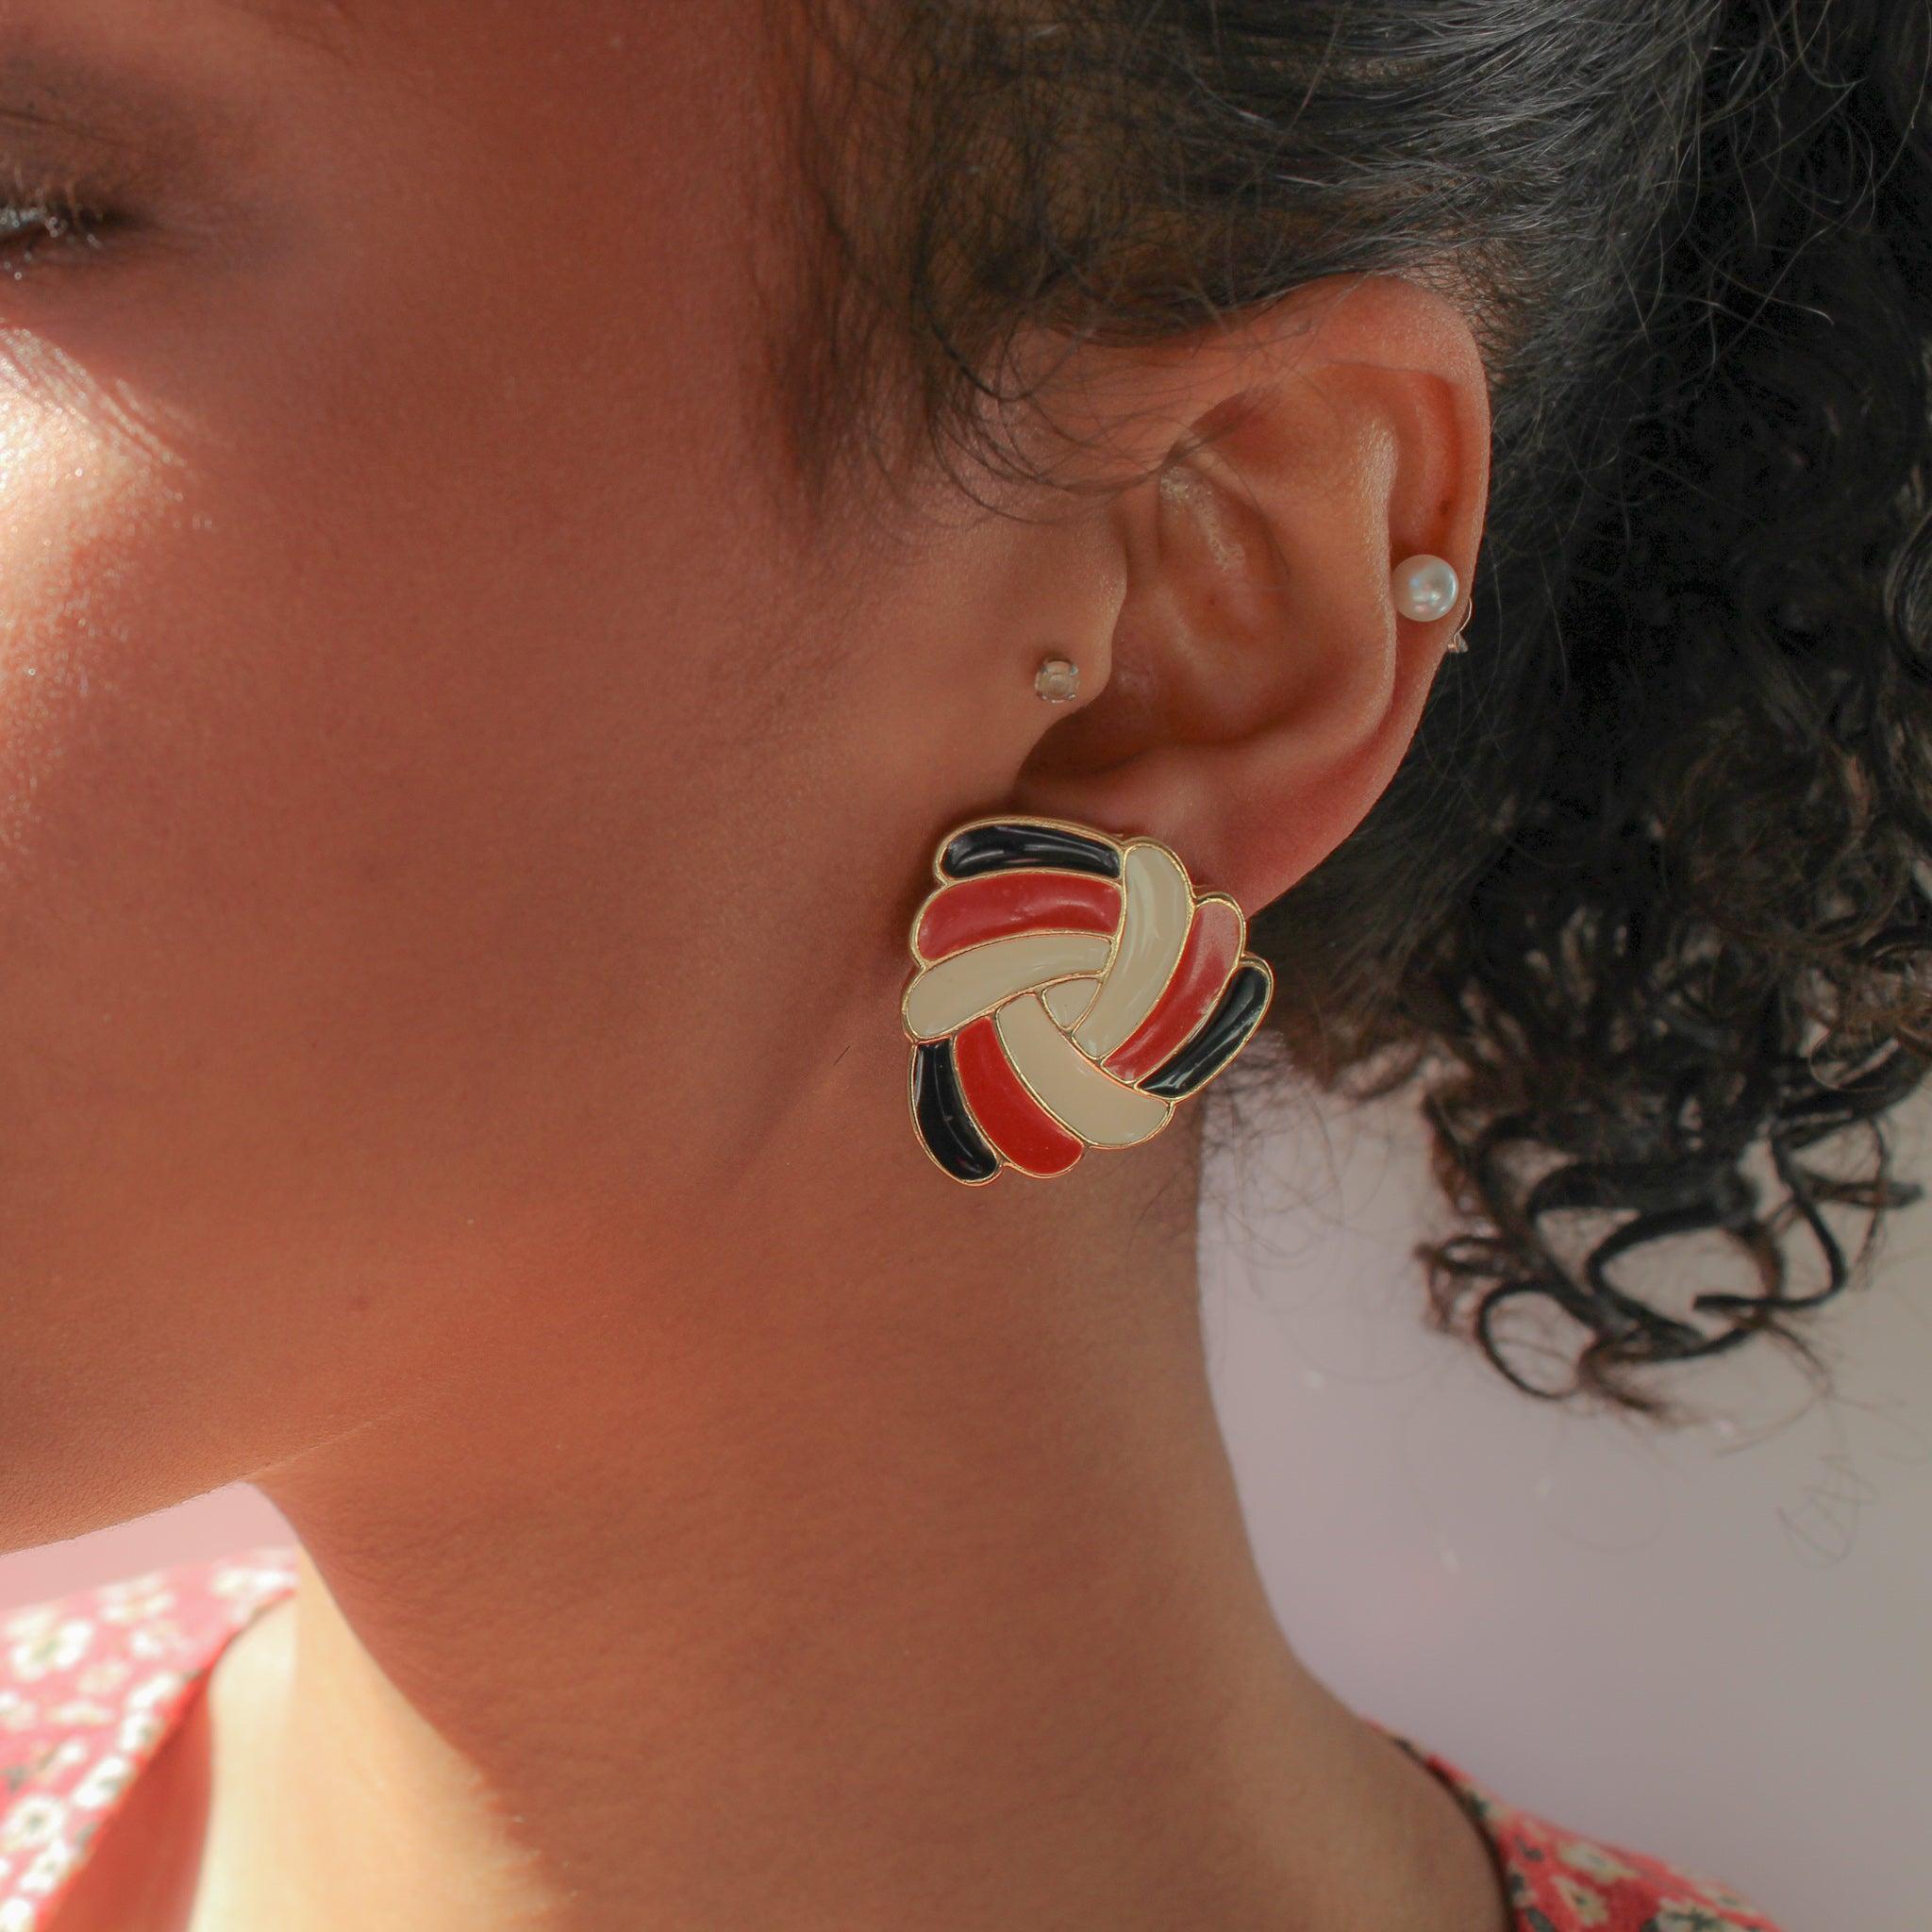 Trifari Vintage 1970s Earrings for Pierced Ears

Made in the USA in the early 1970s. Crafted from gold plated metal and a rich red, black and cream geometric design.

Since the 1920s, Trifari has been one of the most respected and admired producers